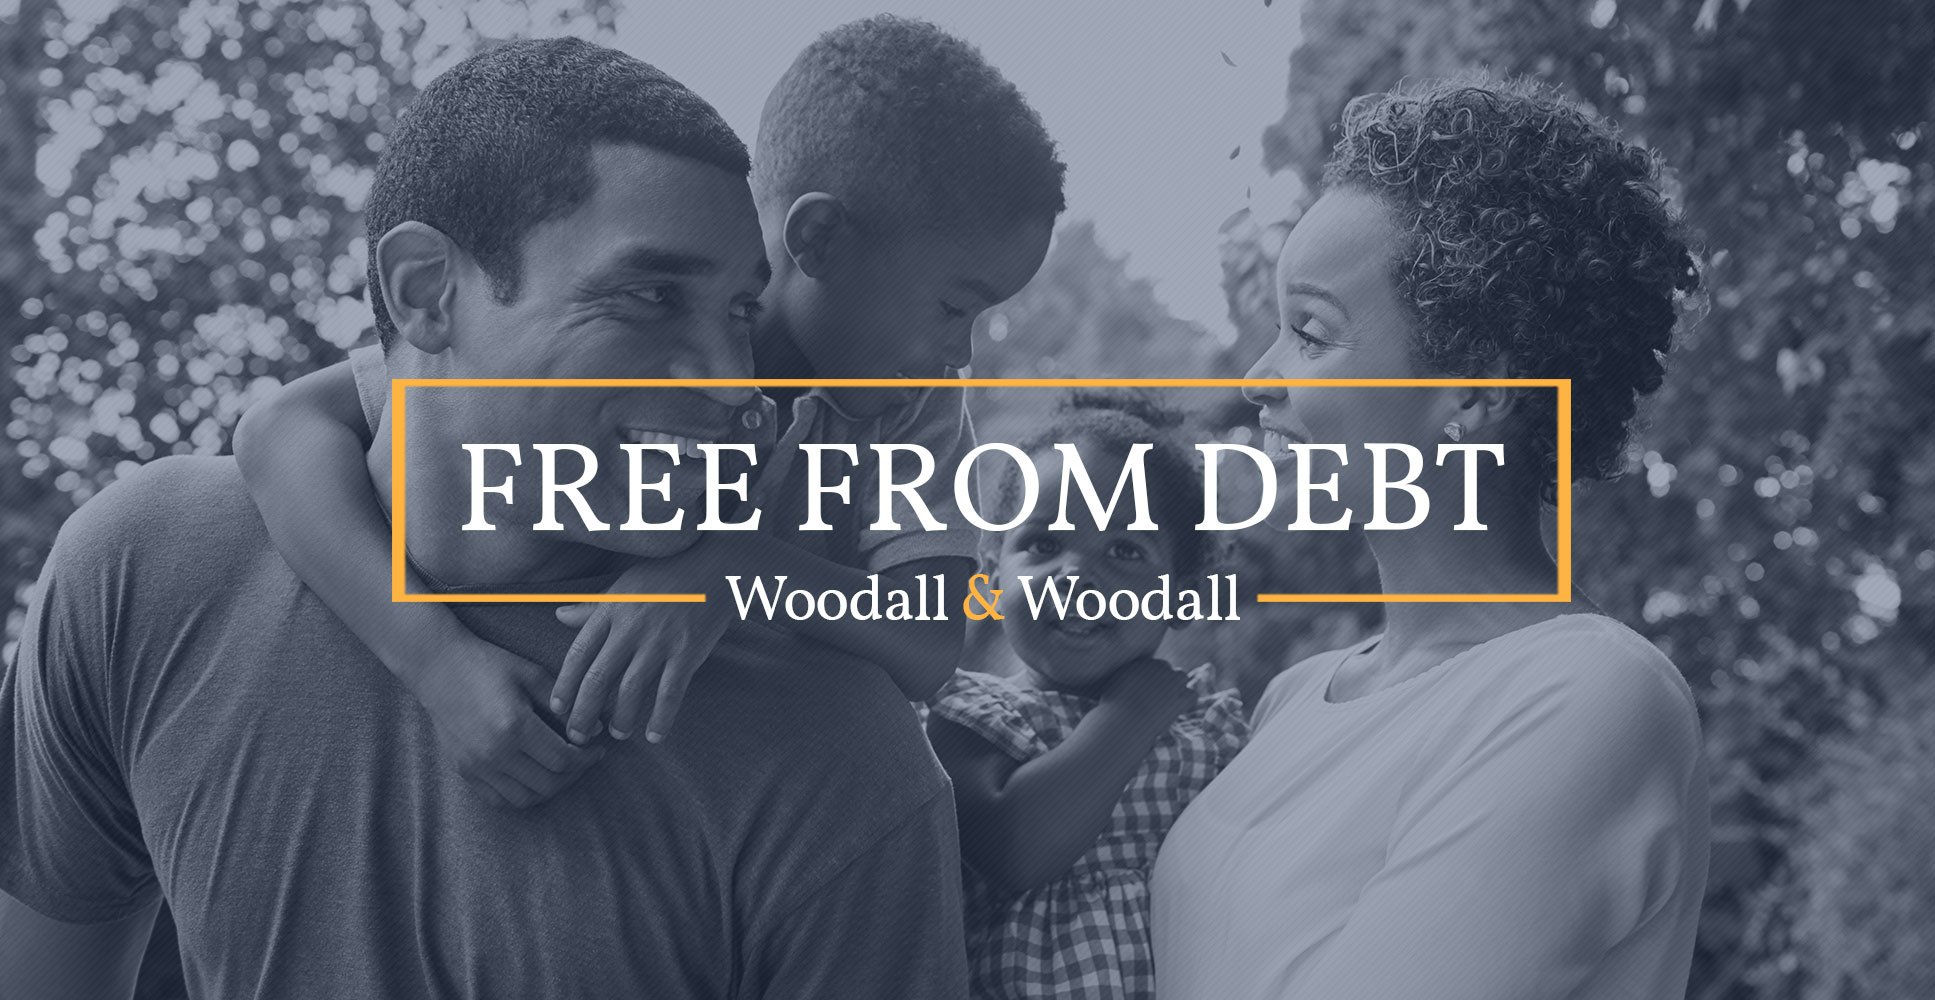 Woodall & Woodall offers debt relief services